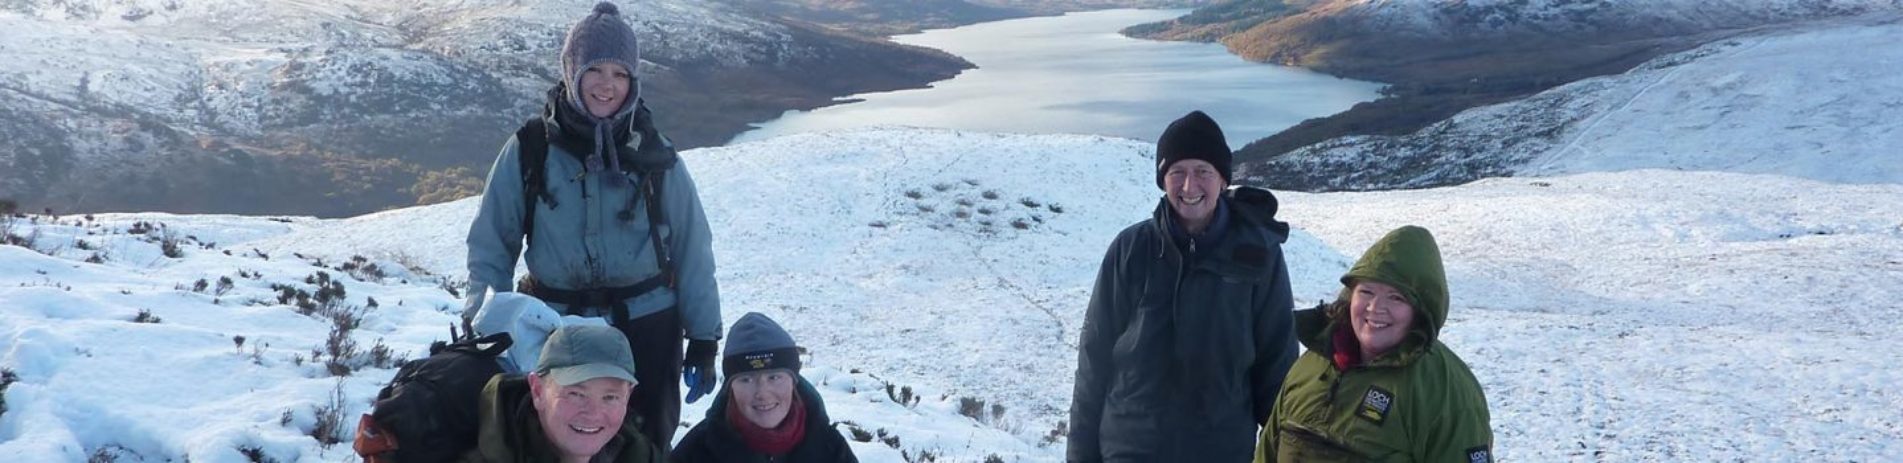 group-of-volunteers-wrapped-up-warm-in-winter-jackets-with-dog-on-snowy-hill-with-loch-arklet-and-mountains-behind